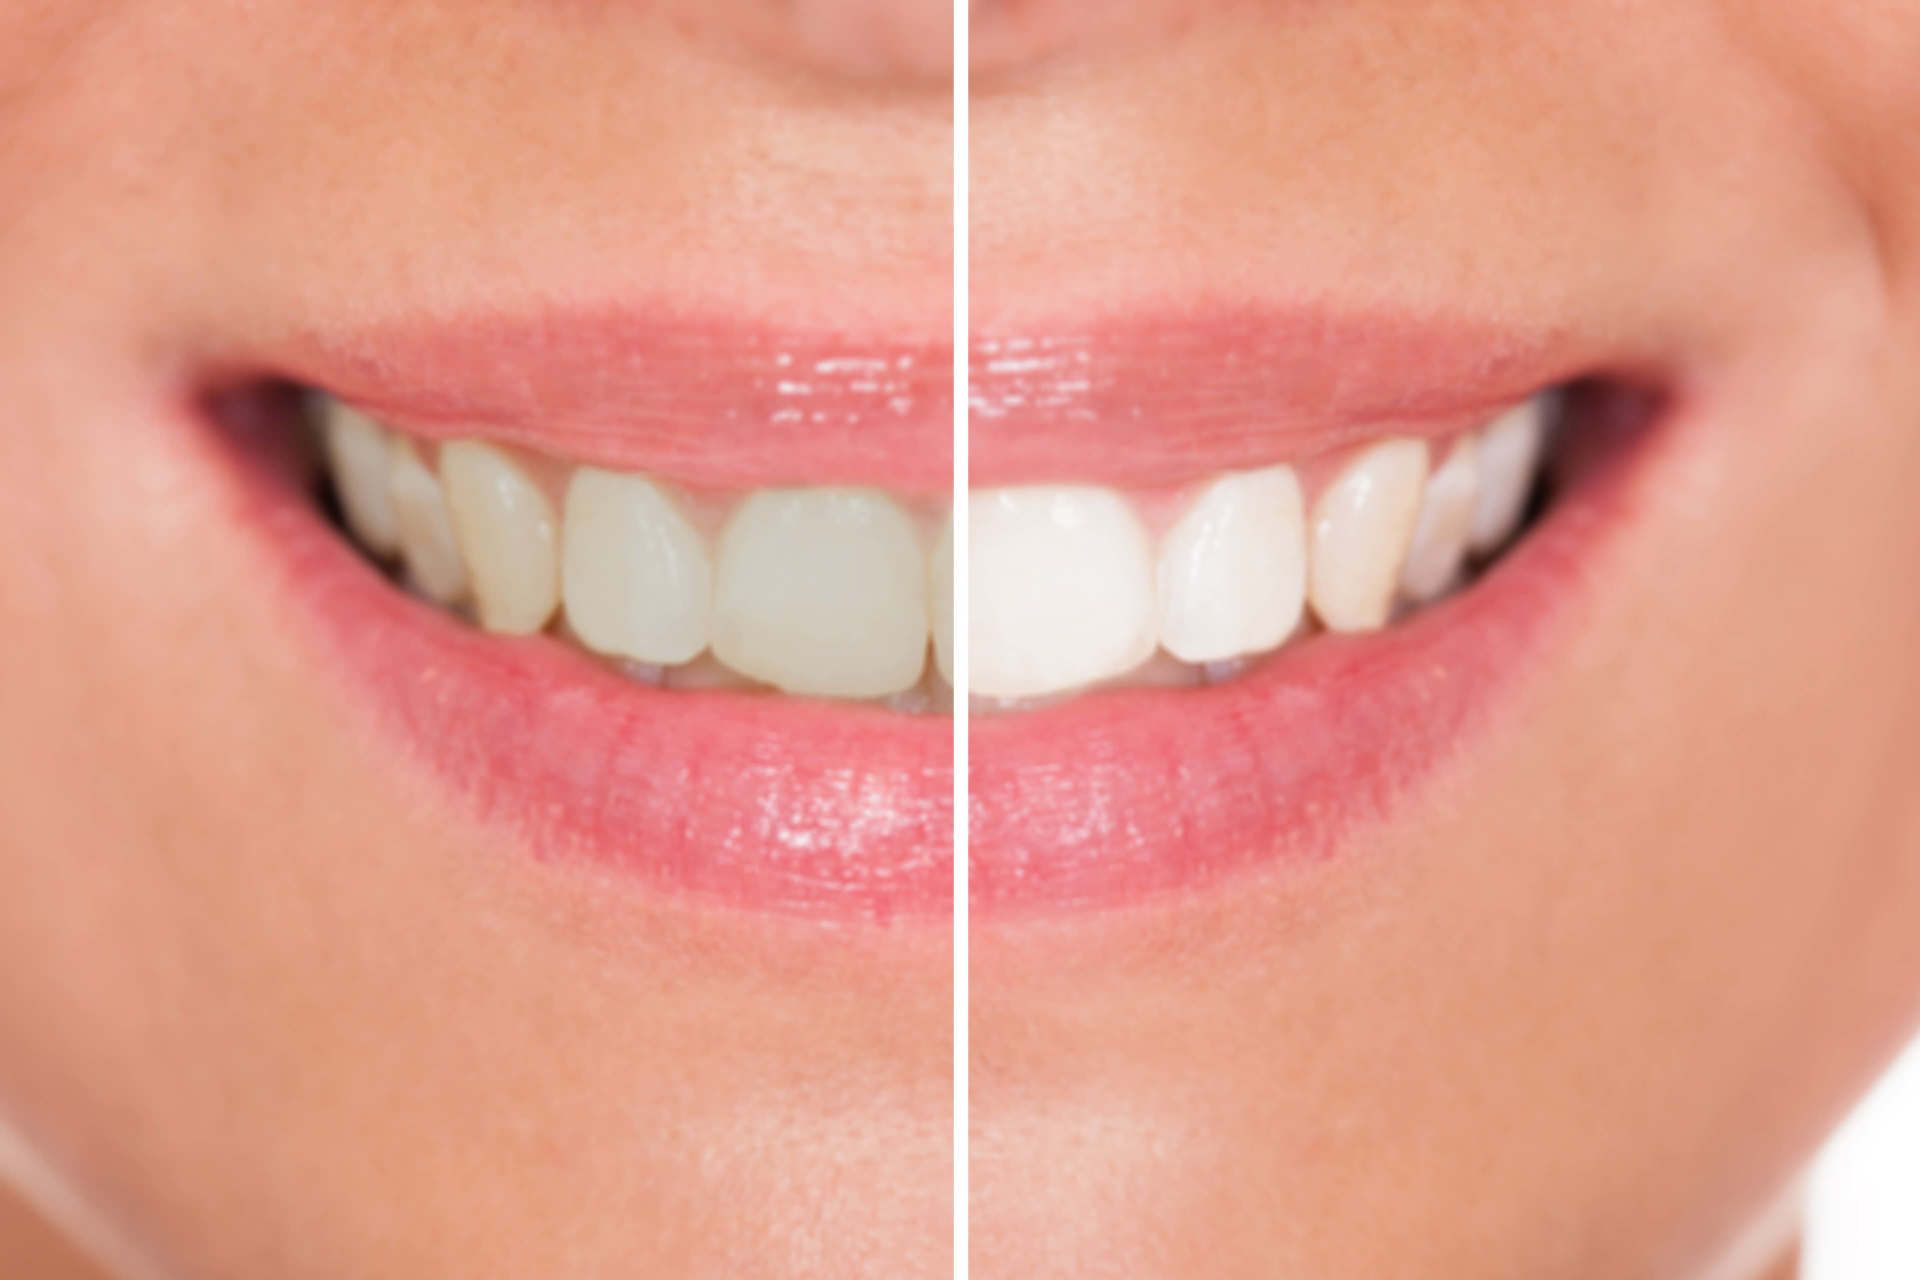 Before and After Teeth Whitening - Dentist in Grayslake, IL